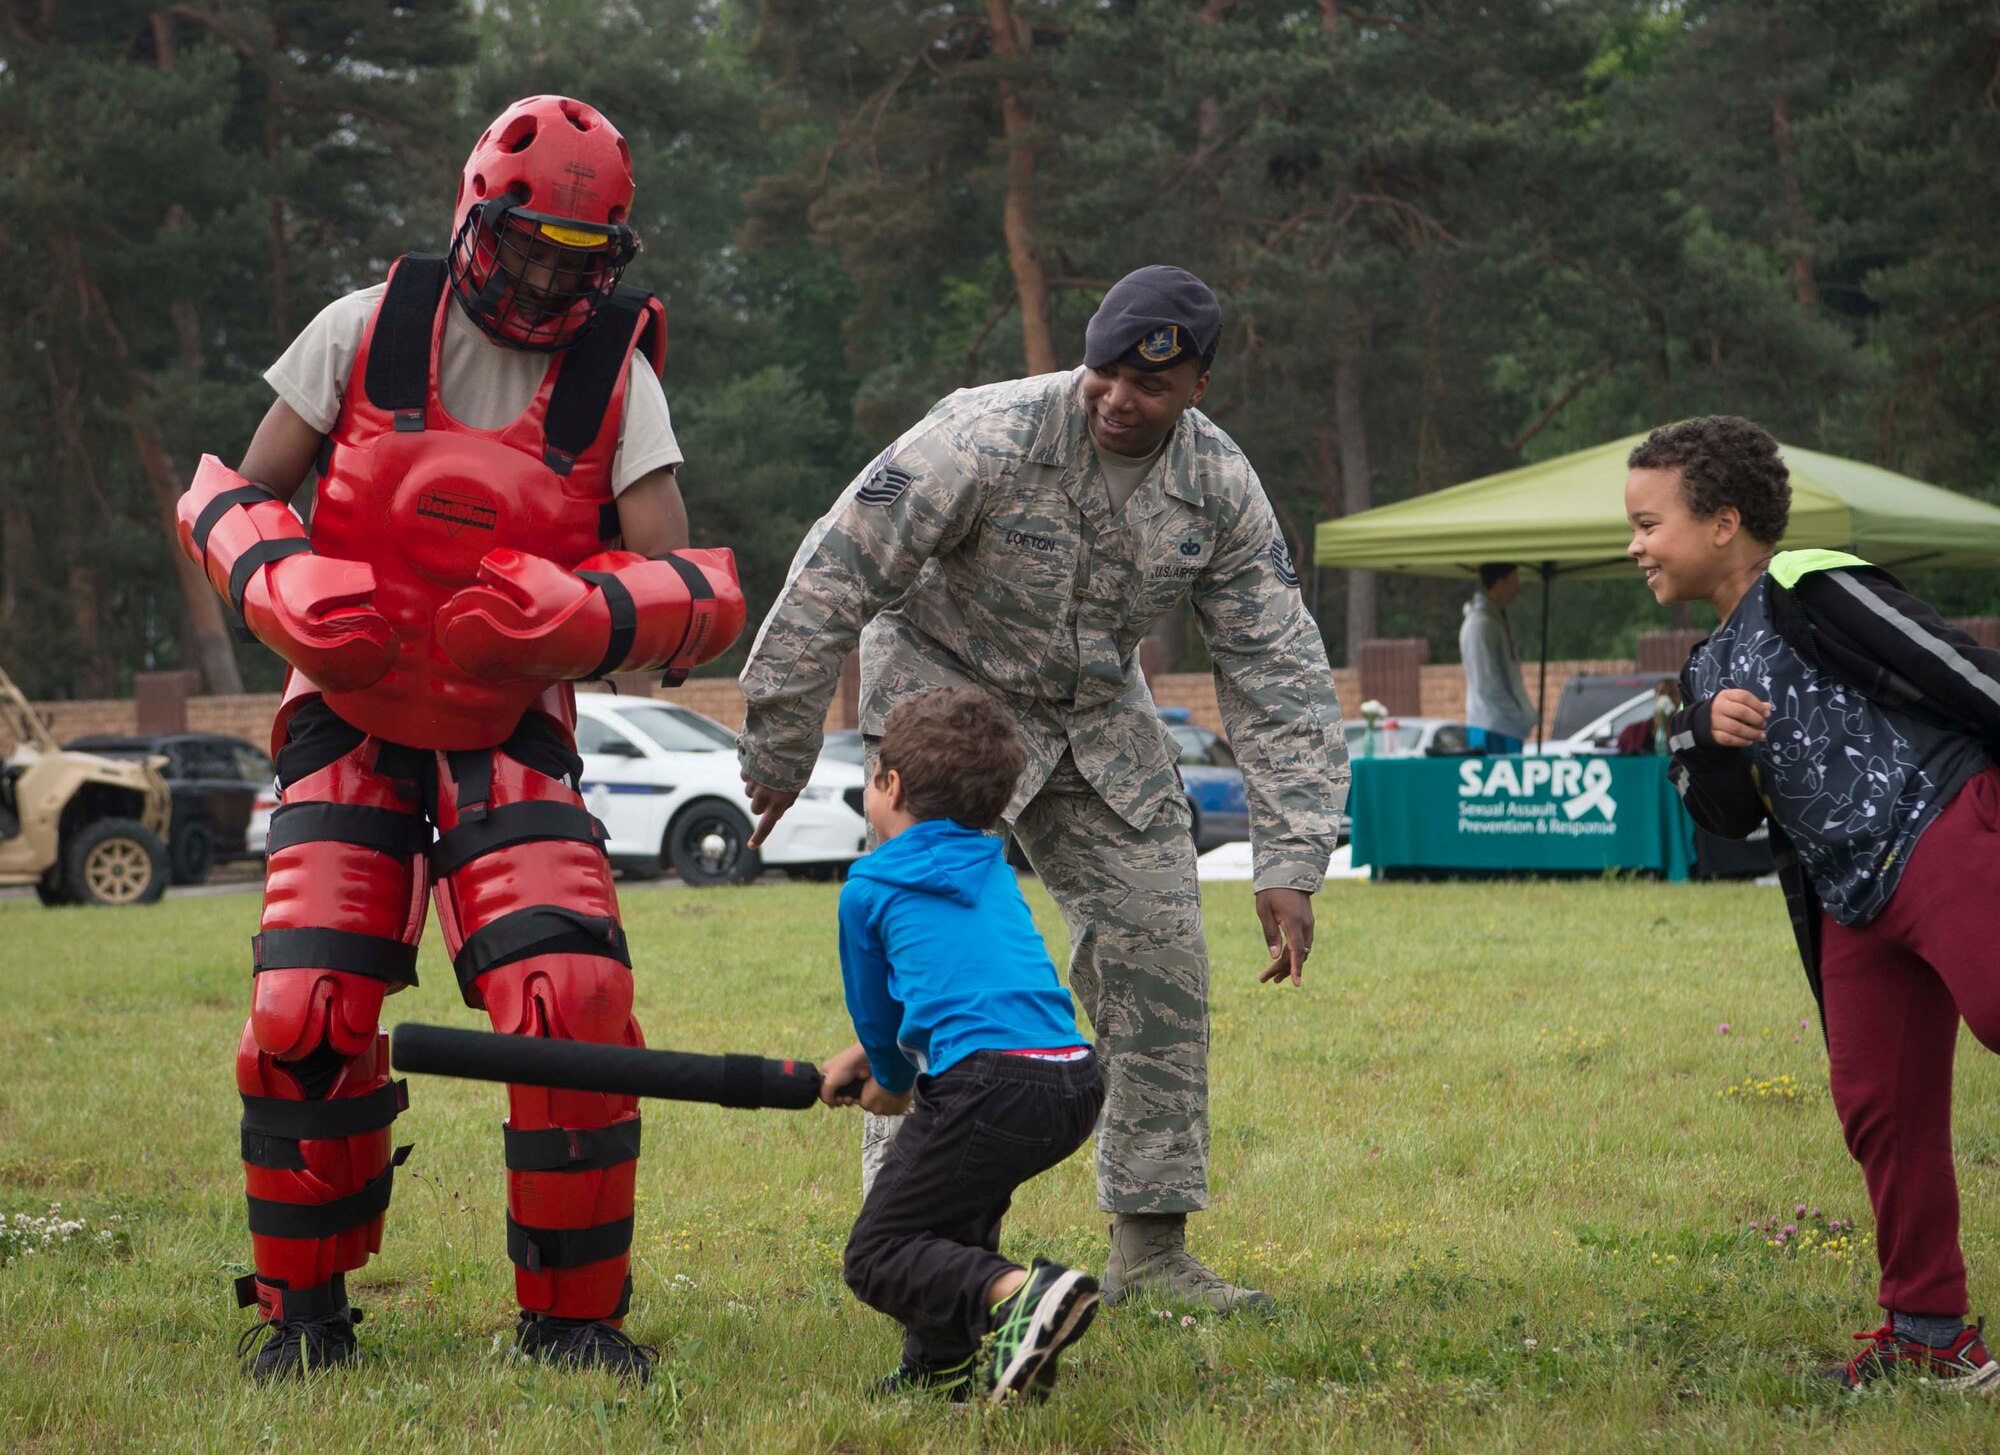 U.S. Air Force Airman 1st Class Deaundrae Ross, left, 86th Security Forces Phoenix Raven team member, wears a “Red Man” suit and invites children to hit him with a padded training baton during Police Week 2018 on Ramstein Air Base, Germany, May 14, 2018. In 1962, President John F. Kennedy signed a proclamation which designated May 15 as Peace Officers Memorial Day, and the week of May 15 as Police Week. (U.S. Air Force photo by Senior Airman Elizabeth Baker)